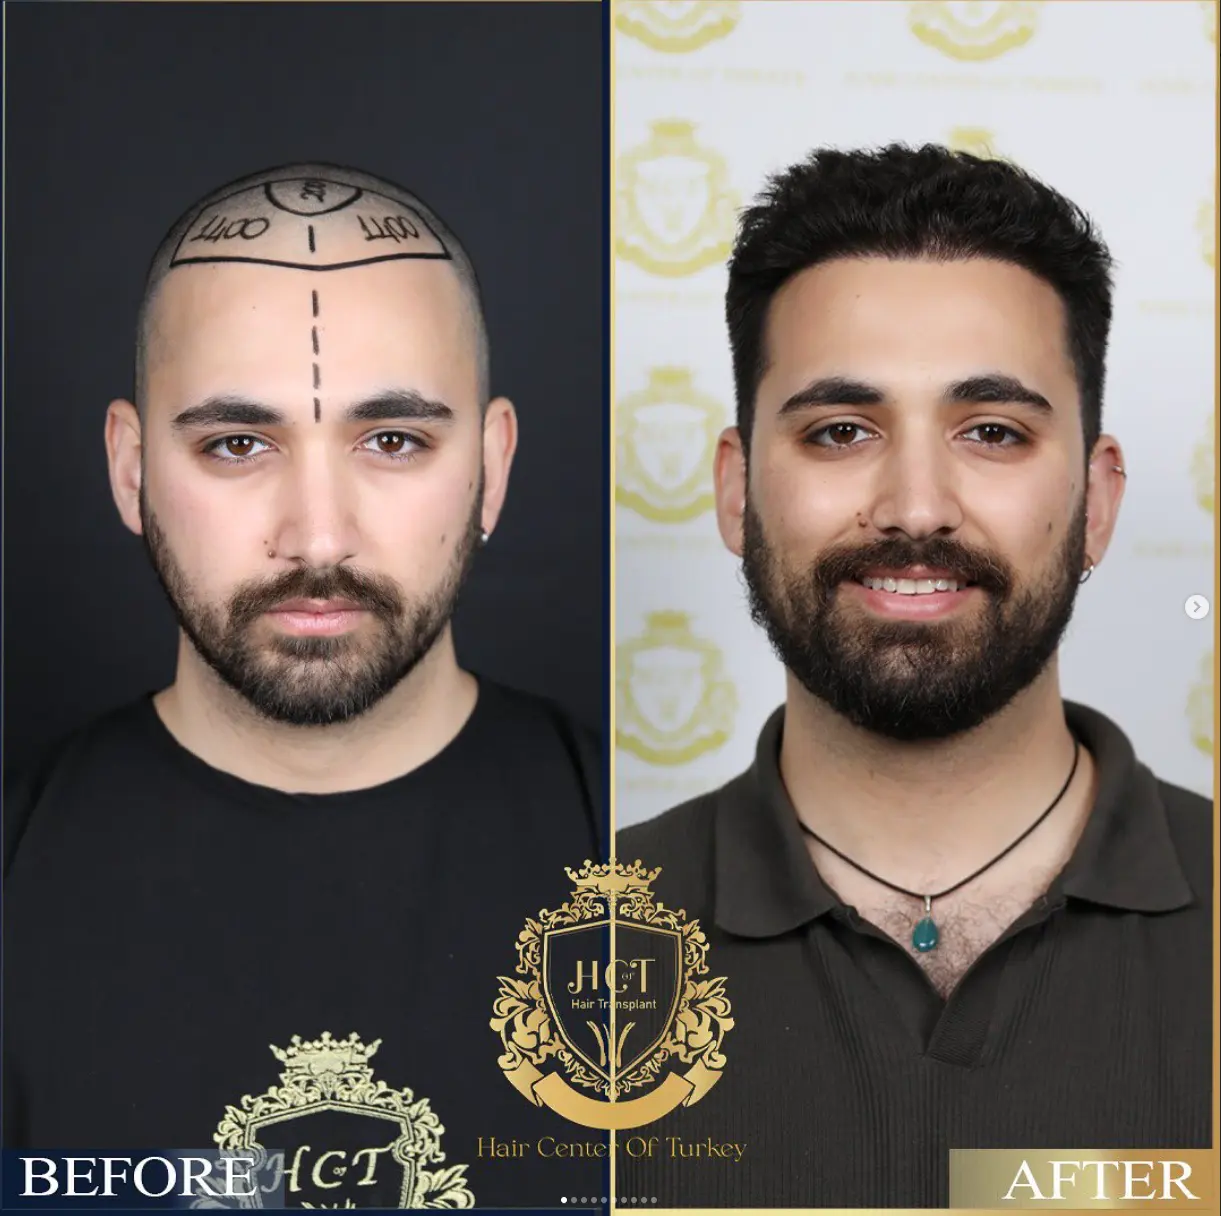 hair transplant before after 7